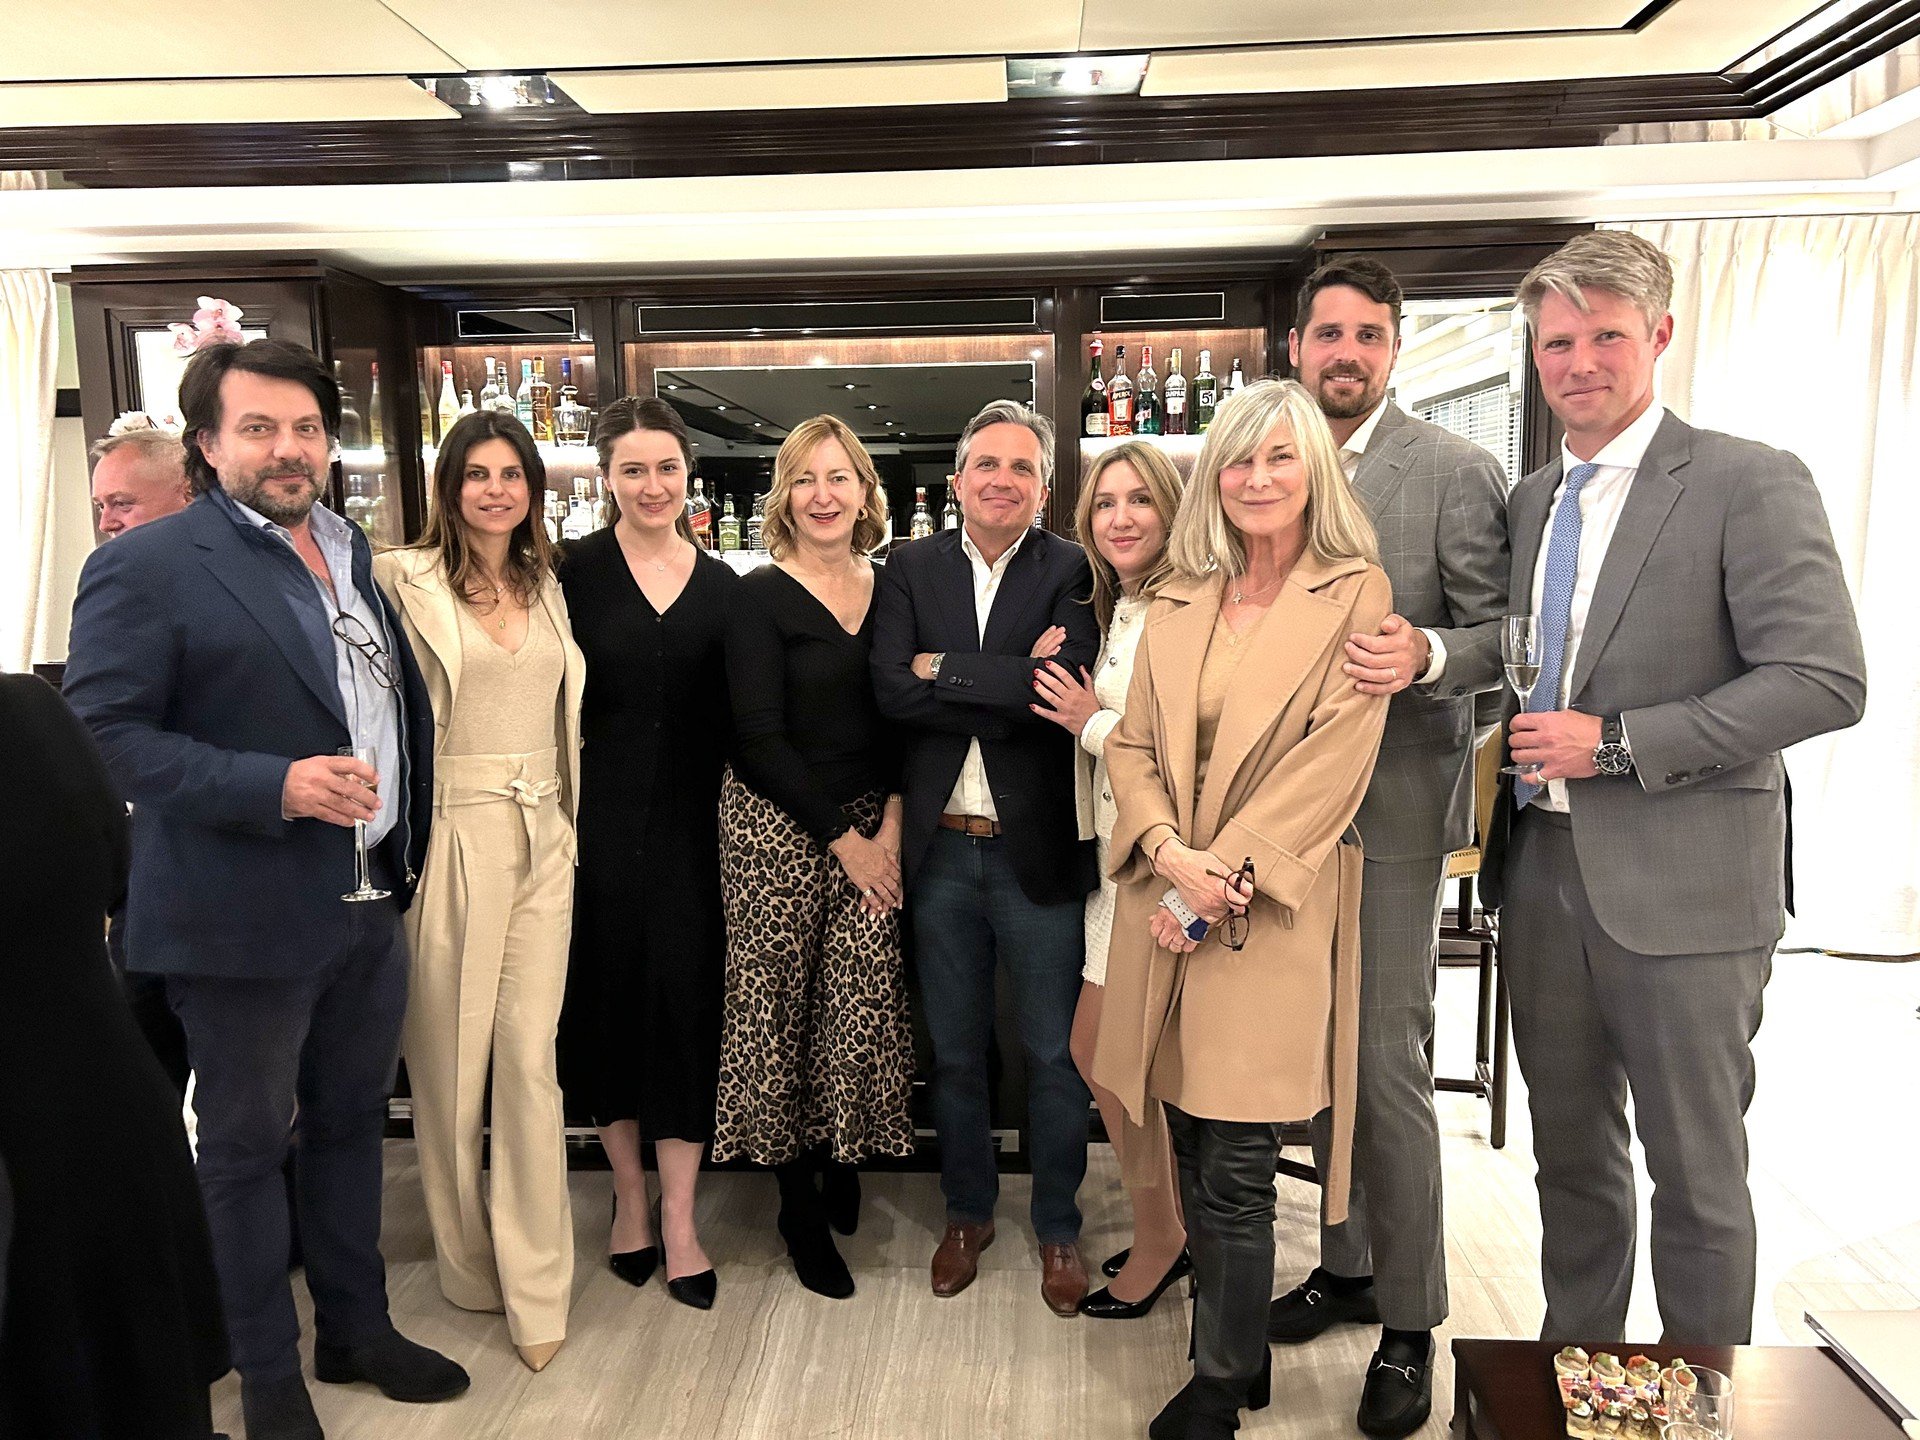 🇲🇨 Corporate Partner Trending Article - Savills World Research and The OWO Residences London by Raffles Present at Monaco Cocktail Party @savillsmonaco @raffleslondon.theowo @themonacopropertyagent 

Irene Luke of Savills Monaco was delighted to co